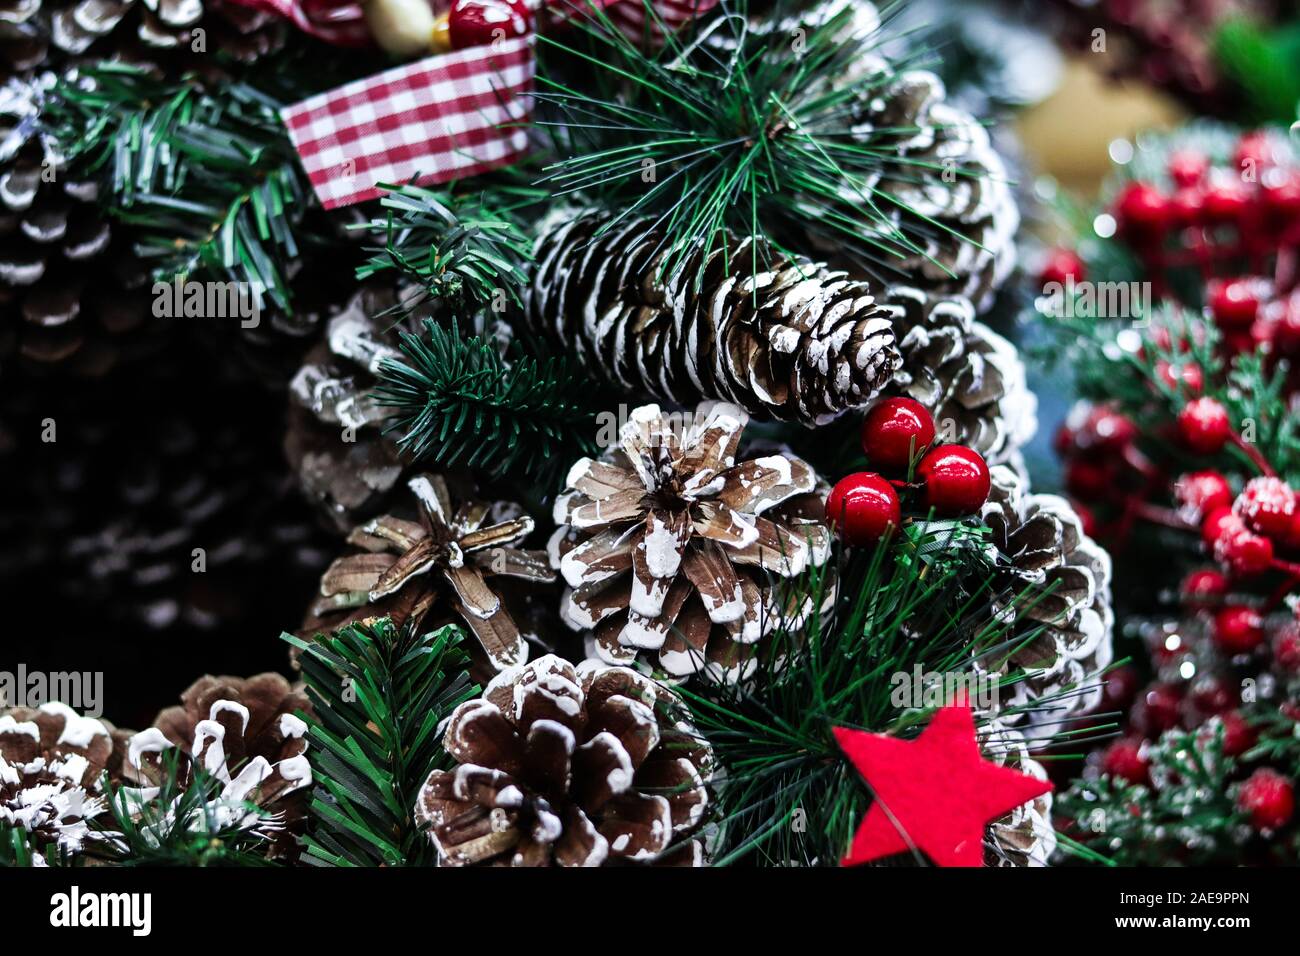 Background for Merry Christmas greetings card. Xmas wreath closeup with pine cones. Happy holidays. Stock Photo